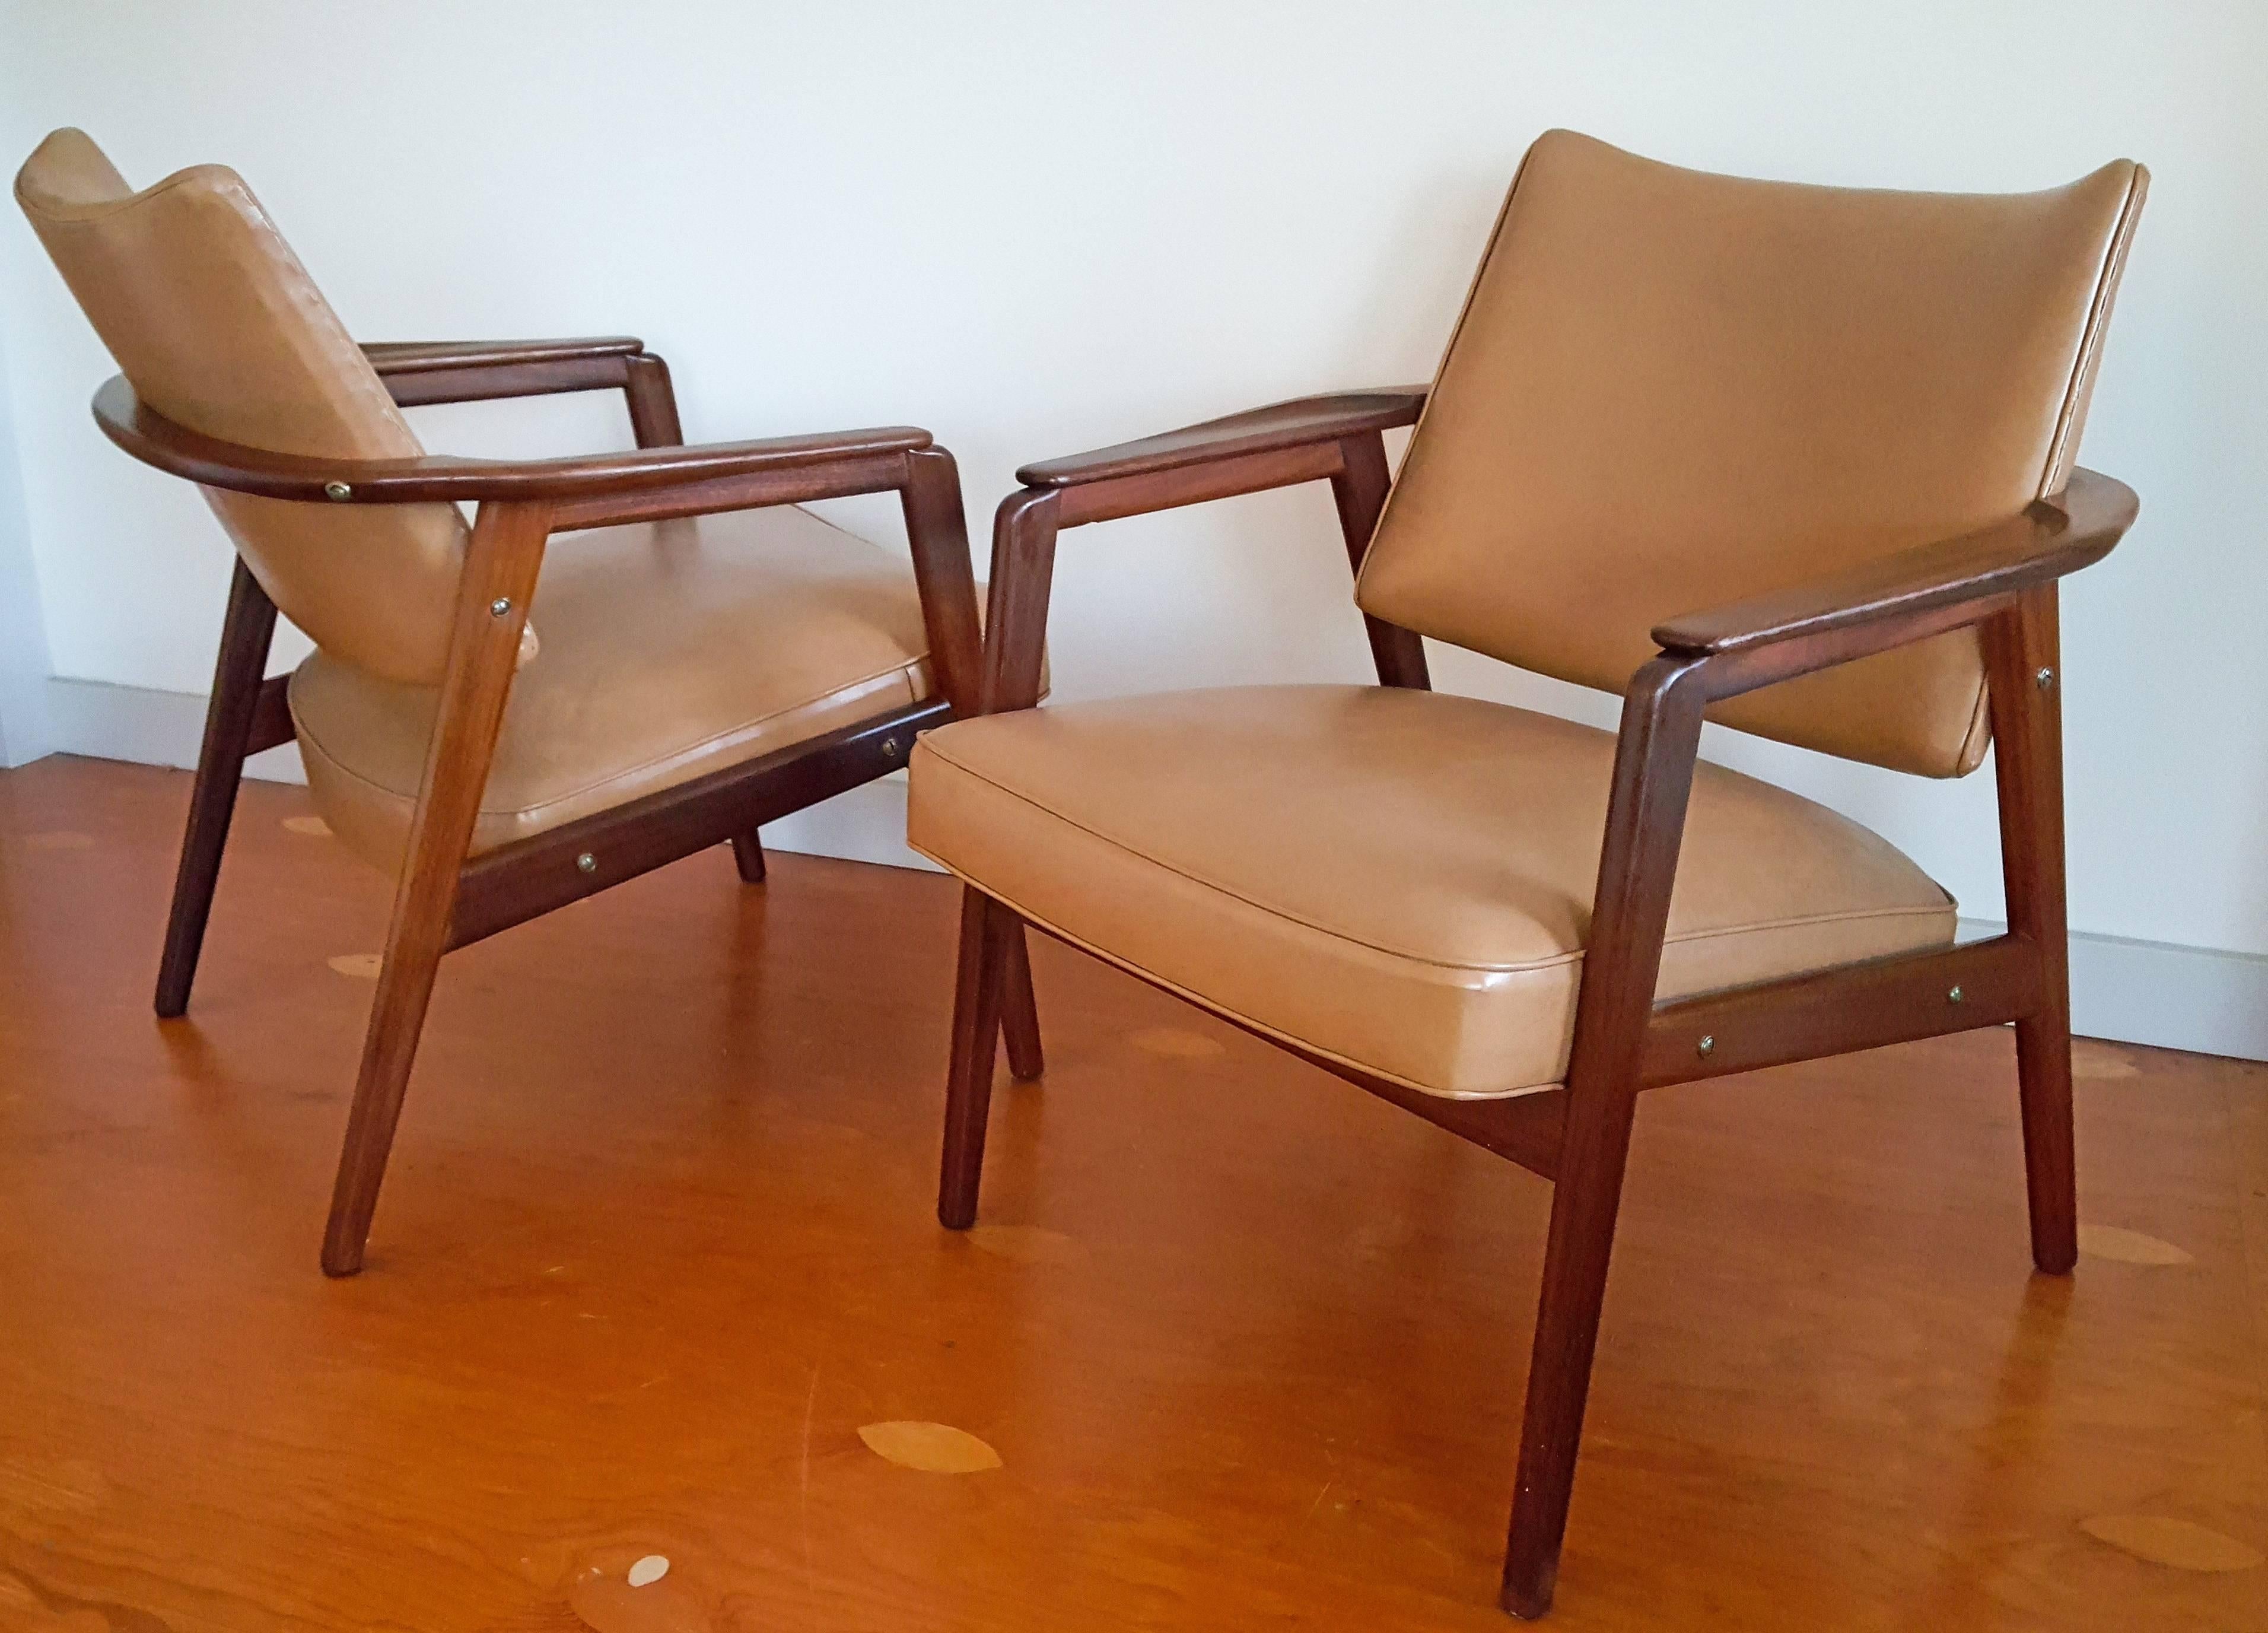 A stunning pair of Mid-Century sculptural teak lounge chairs in the style of Sigvard Bernadotte. These stunning chairs date back to the mid-1950s and are in excellent condition upholstered in original tan vinyl.